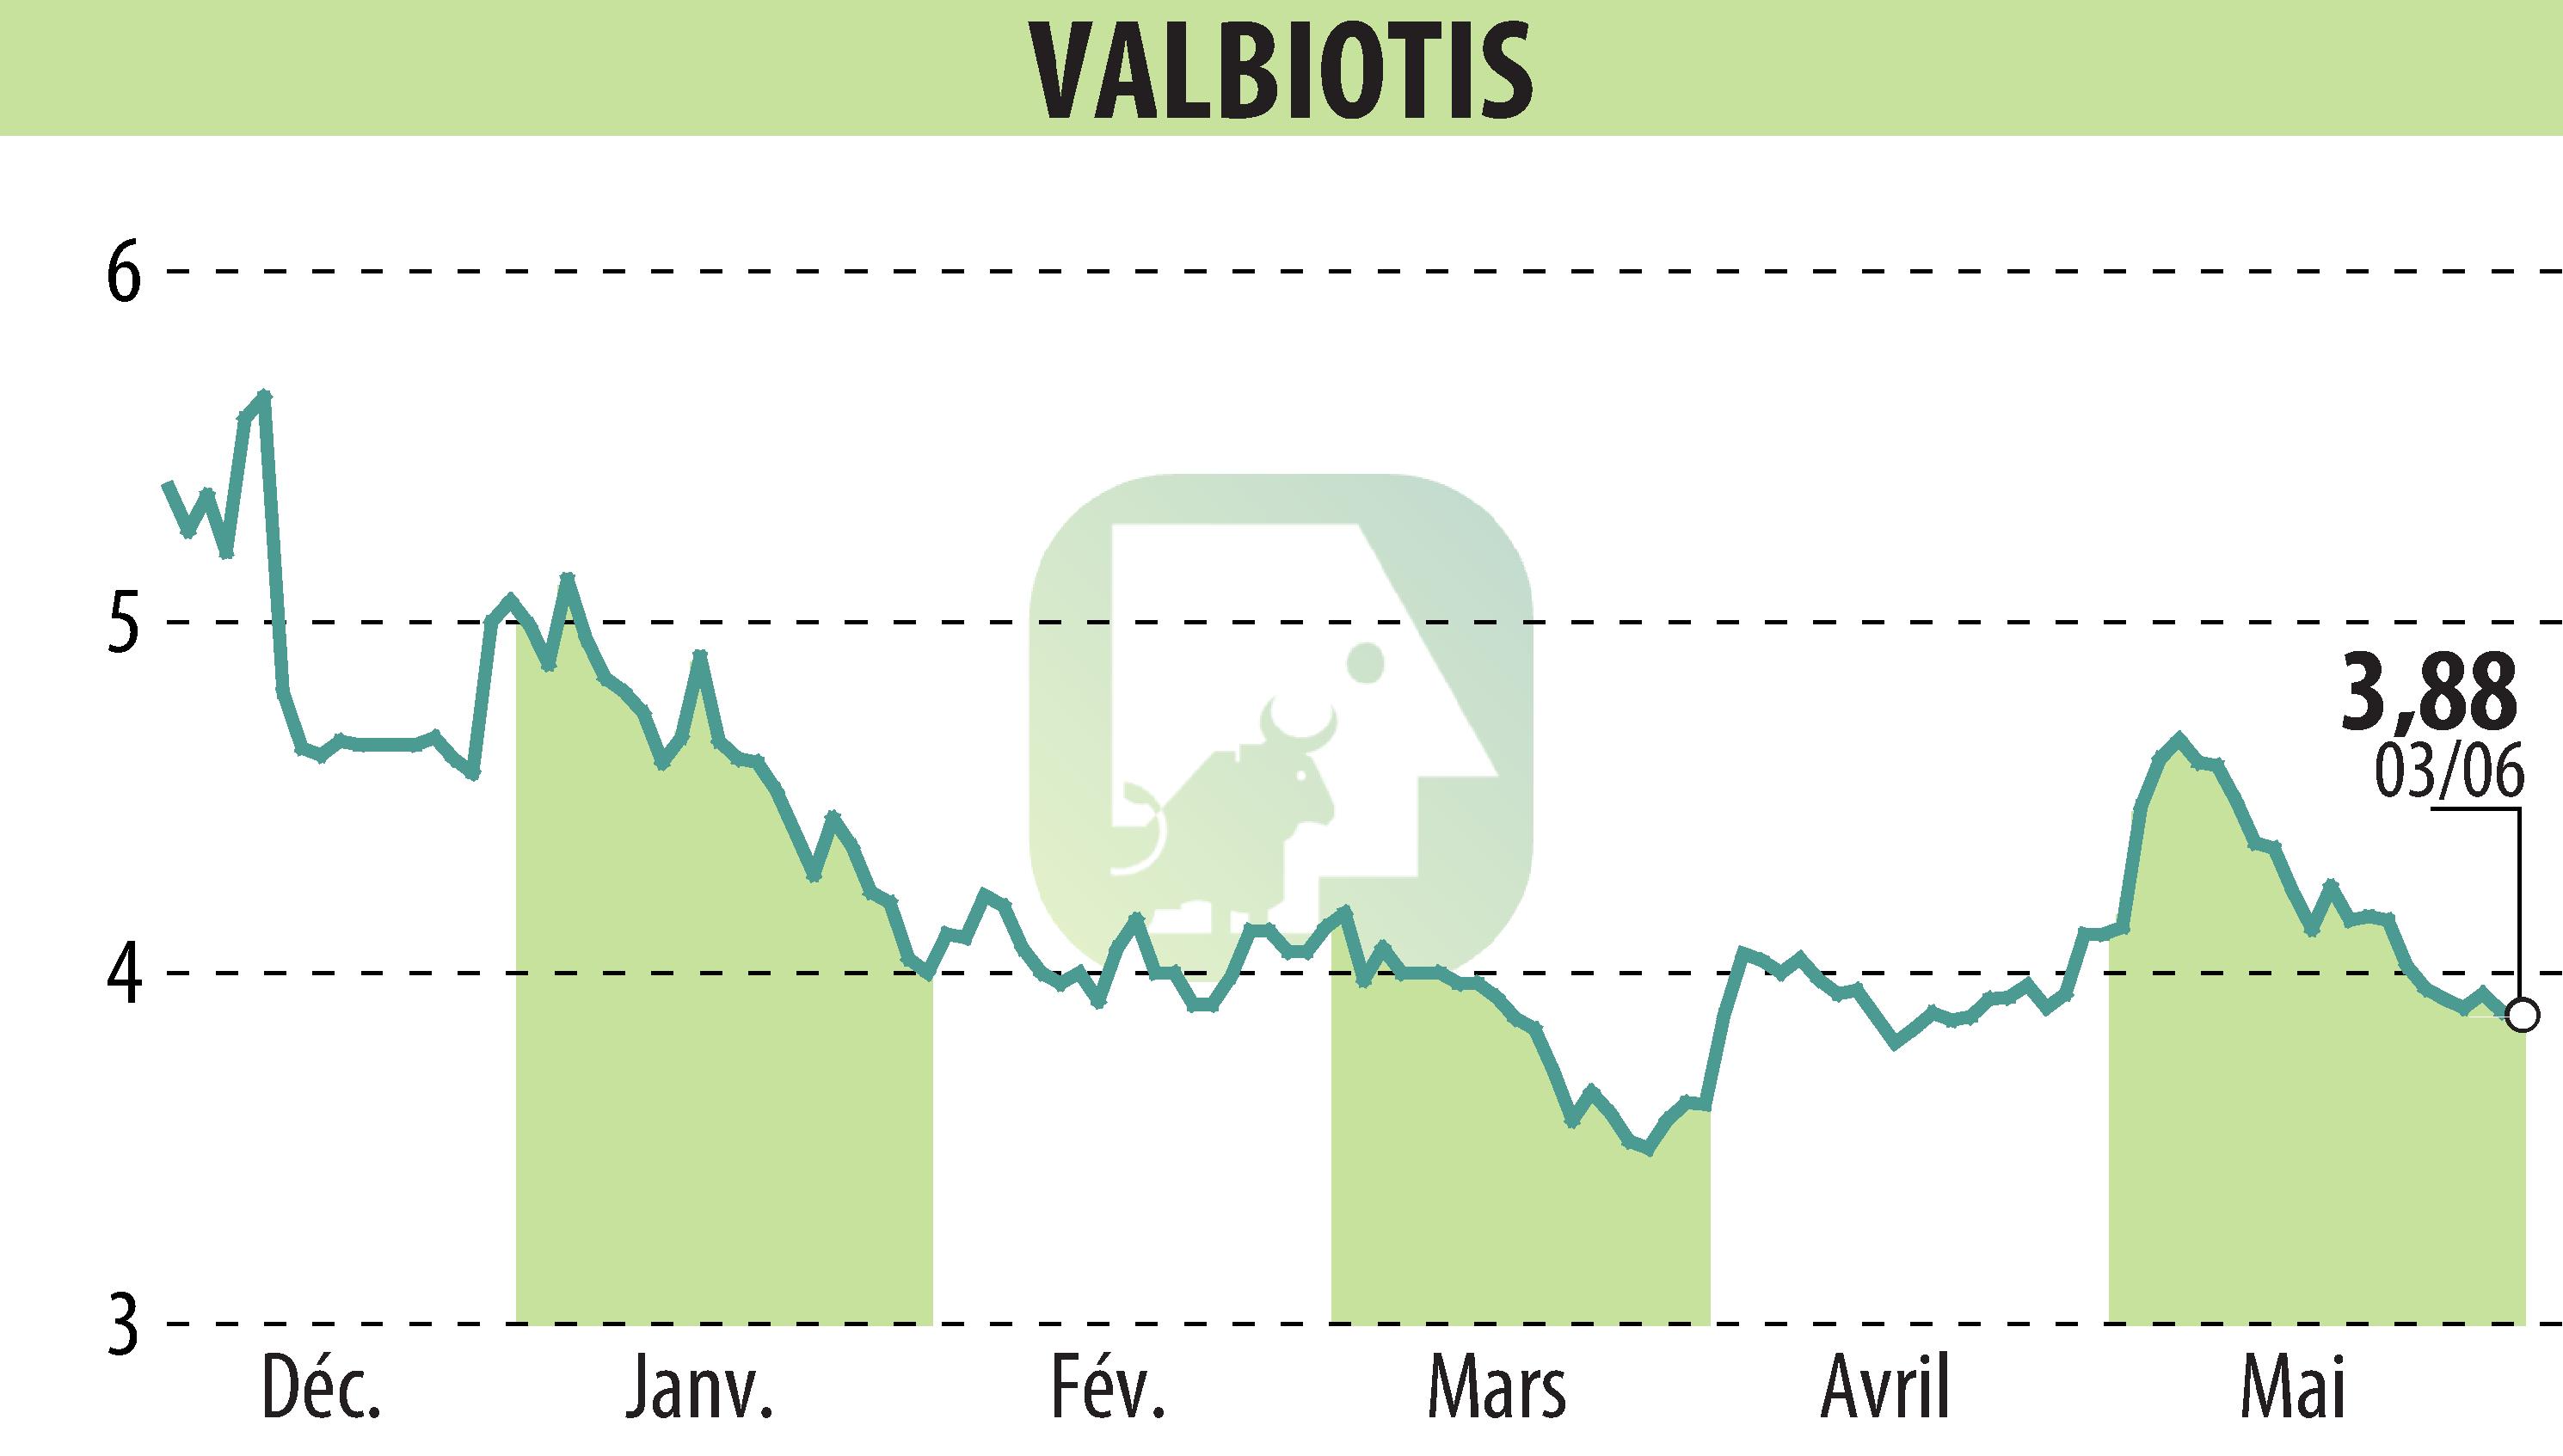 Stock price chart of VALBIOTIS (EPA:ALVAL) showing fluctuations.